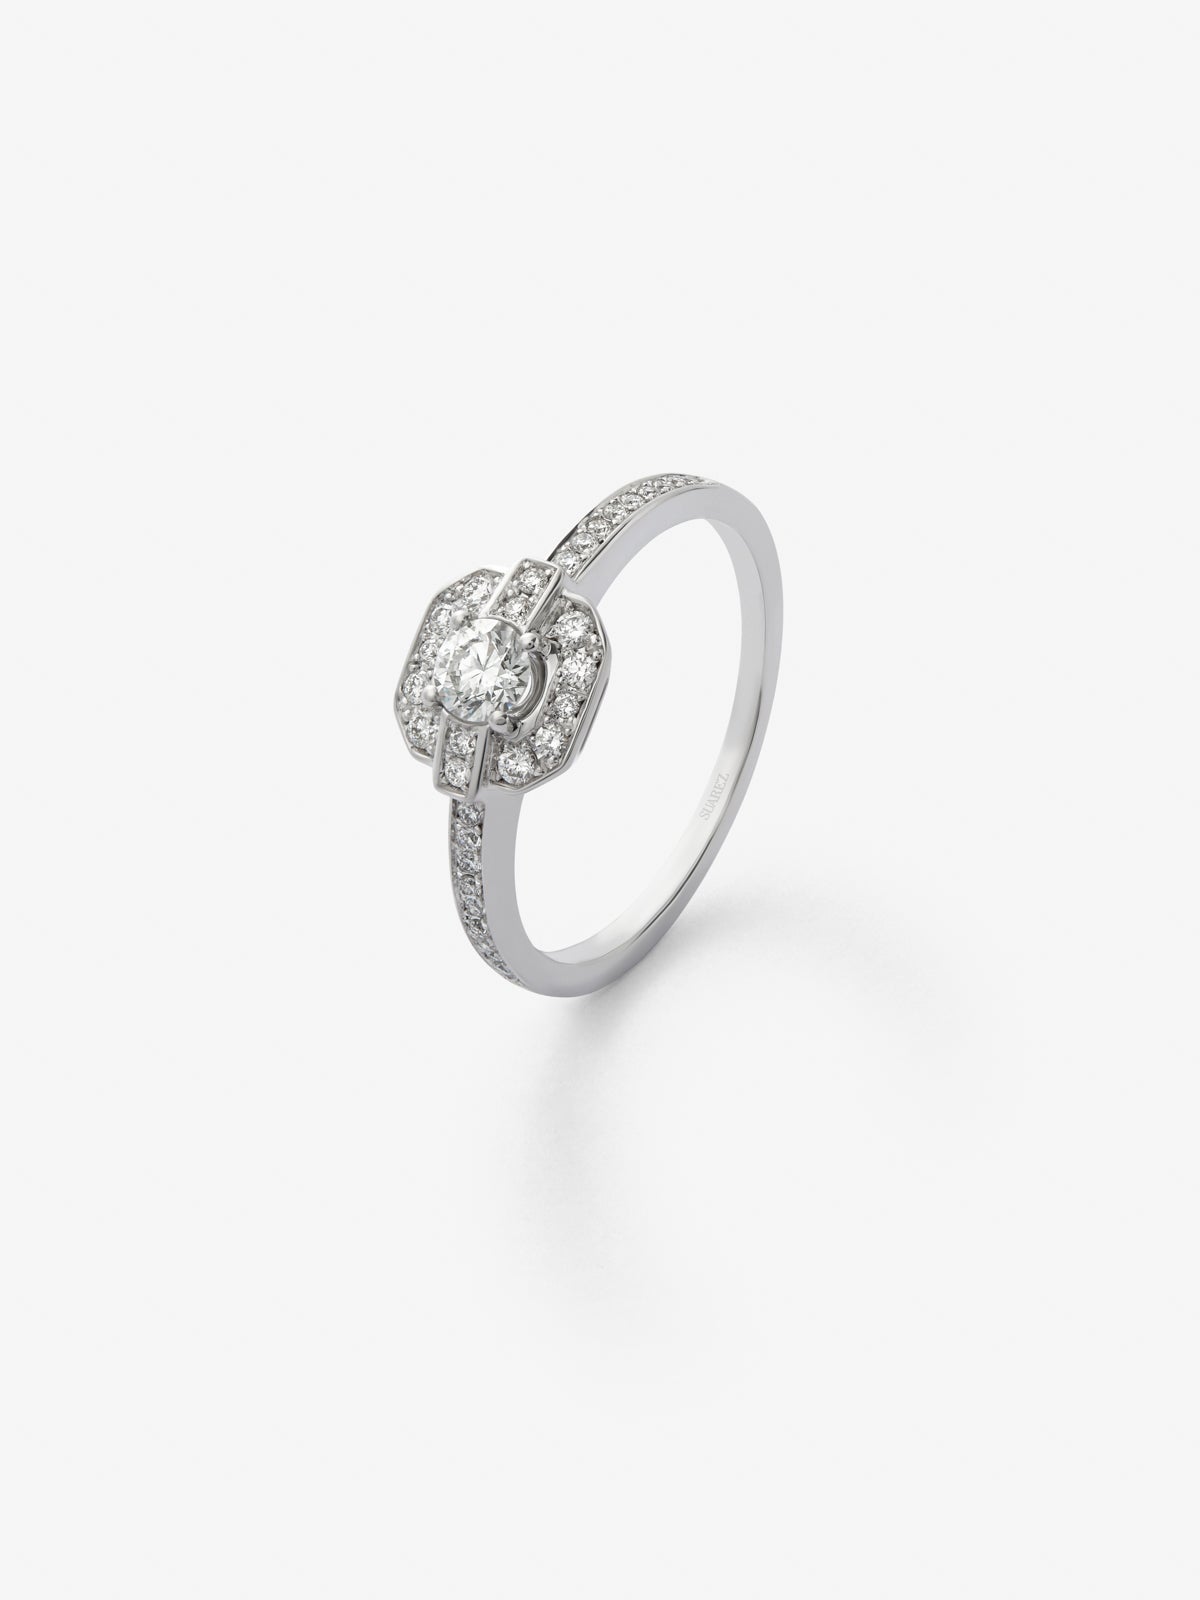 18K white gold ring with central brilliant-cut diamond of 0.5 cts and border and arm of 32 brilliant-cut diamonds with a total of 0.32 cts